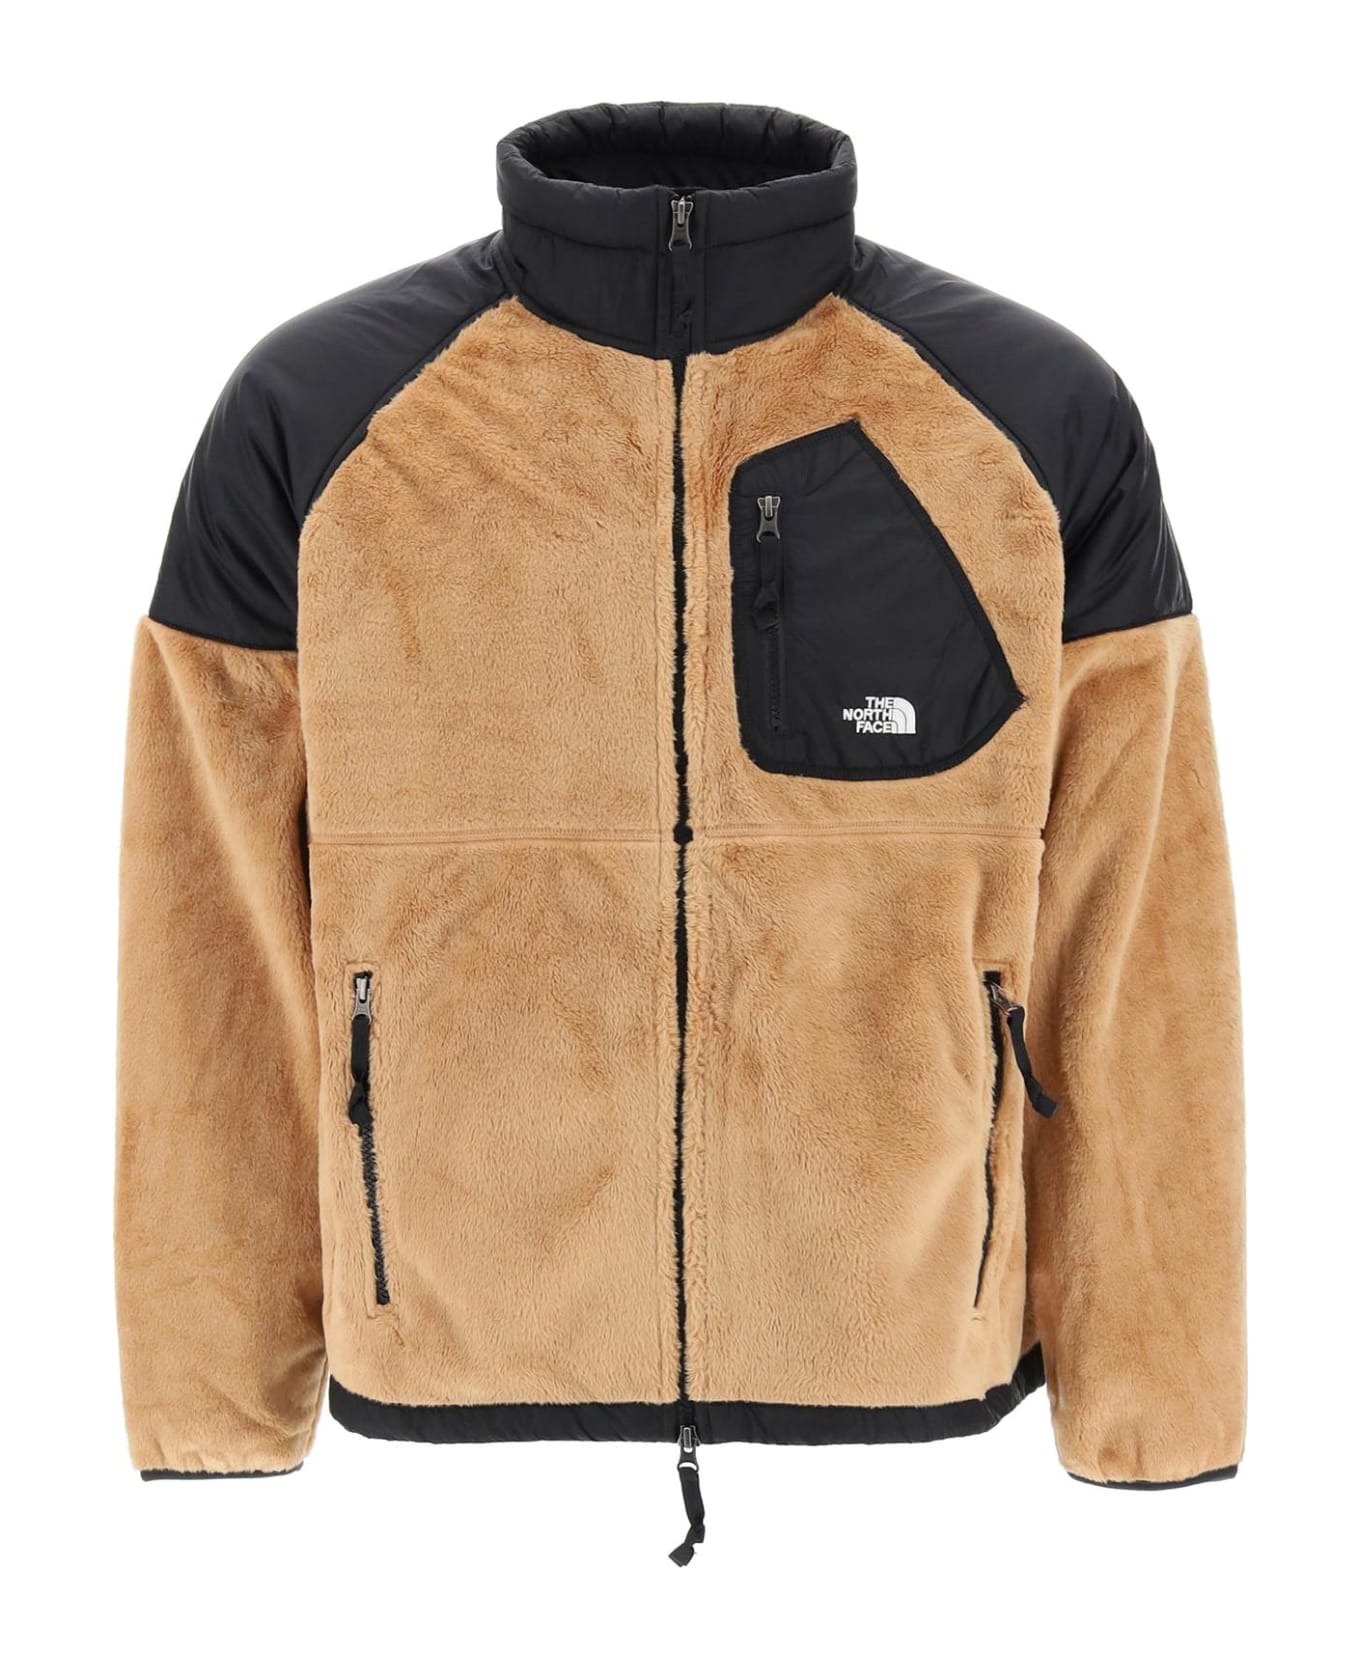 The North Face Fleece Jacket With Nylon Inserts - ALMOND BUTTERTNF BLACK (Beige) ジャケット